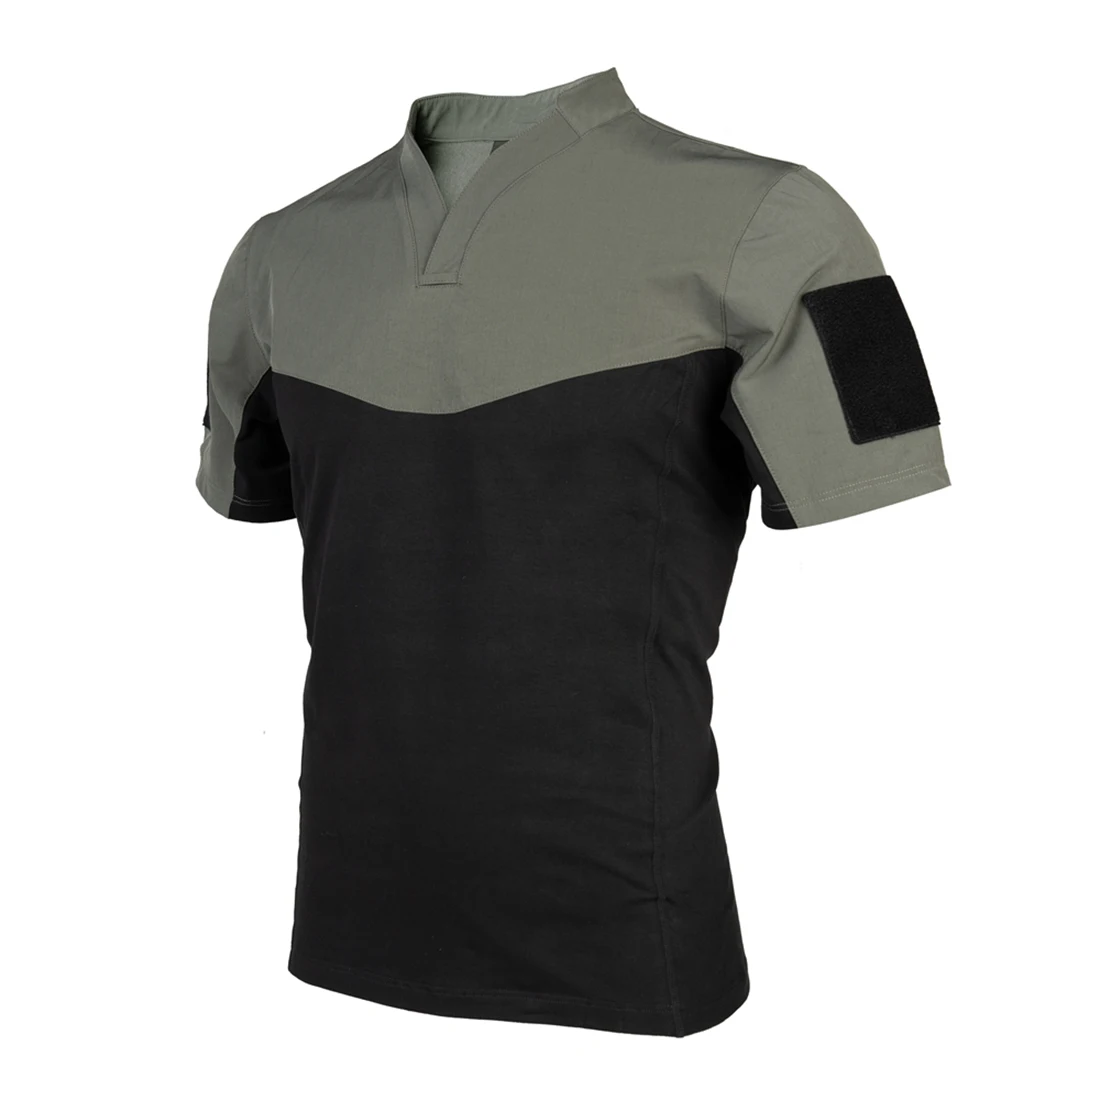 TRN Breathable Summer Tactical Shirt Military Short Sleeve Army Tee Shirt V-Neck Training Top Sleeves